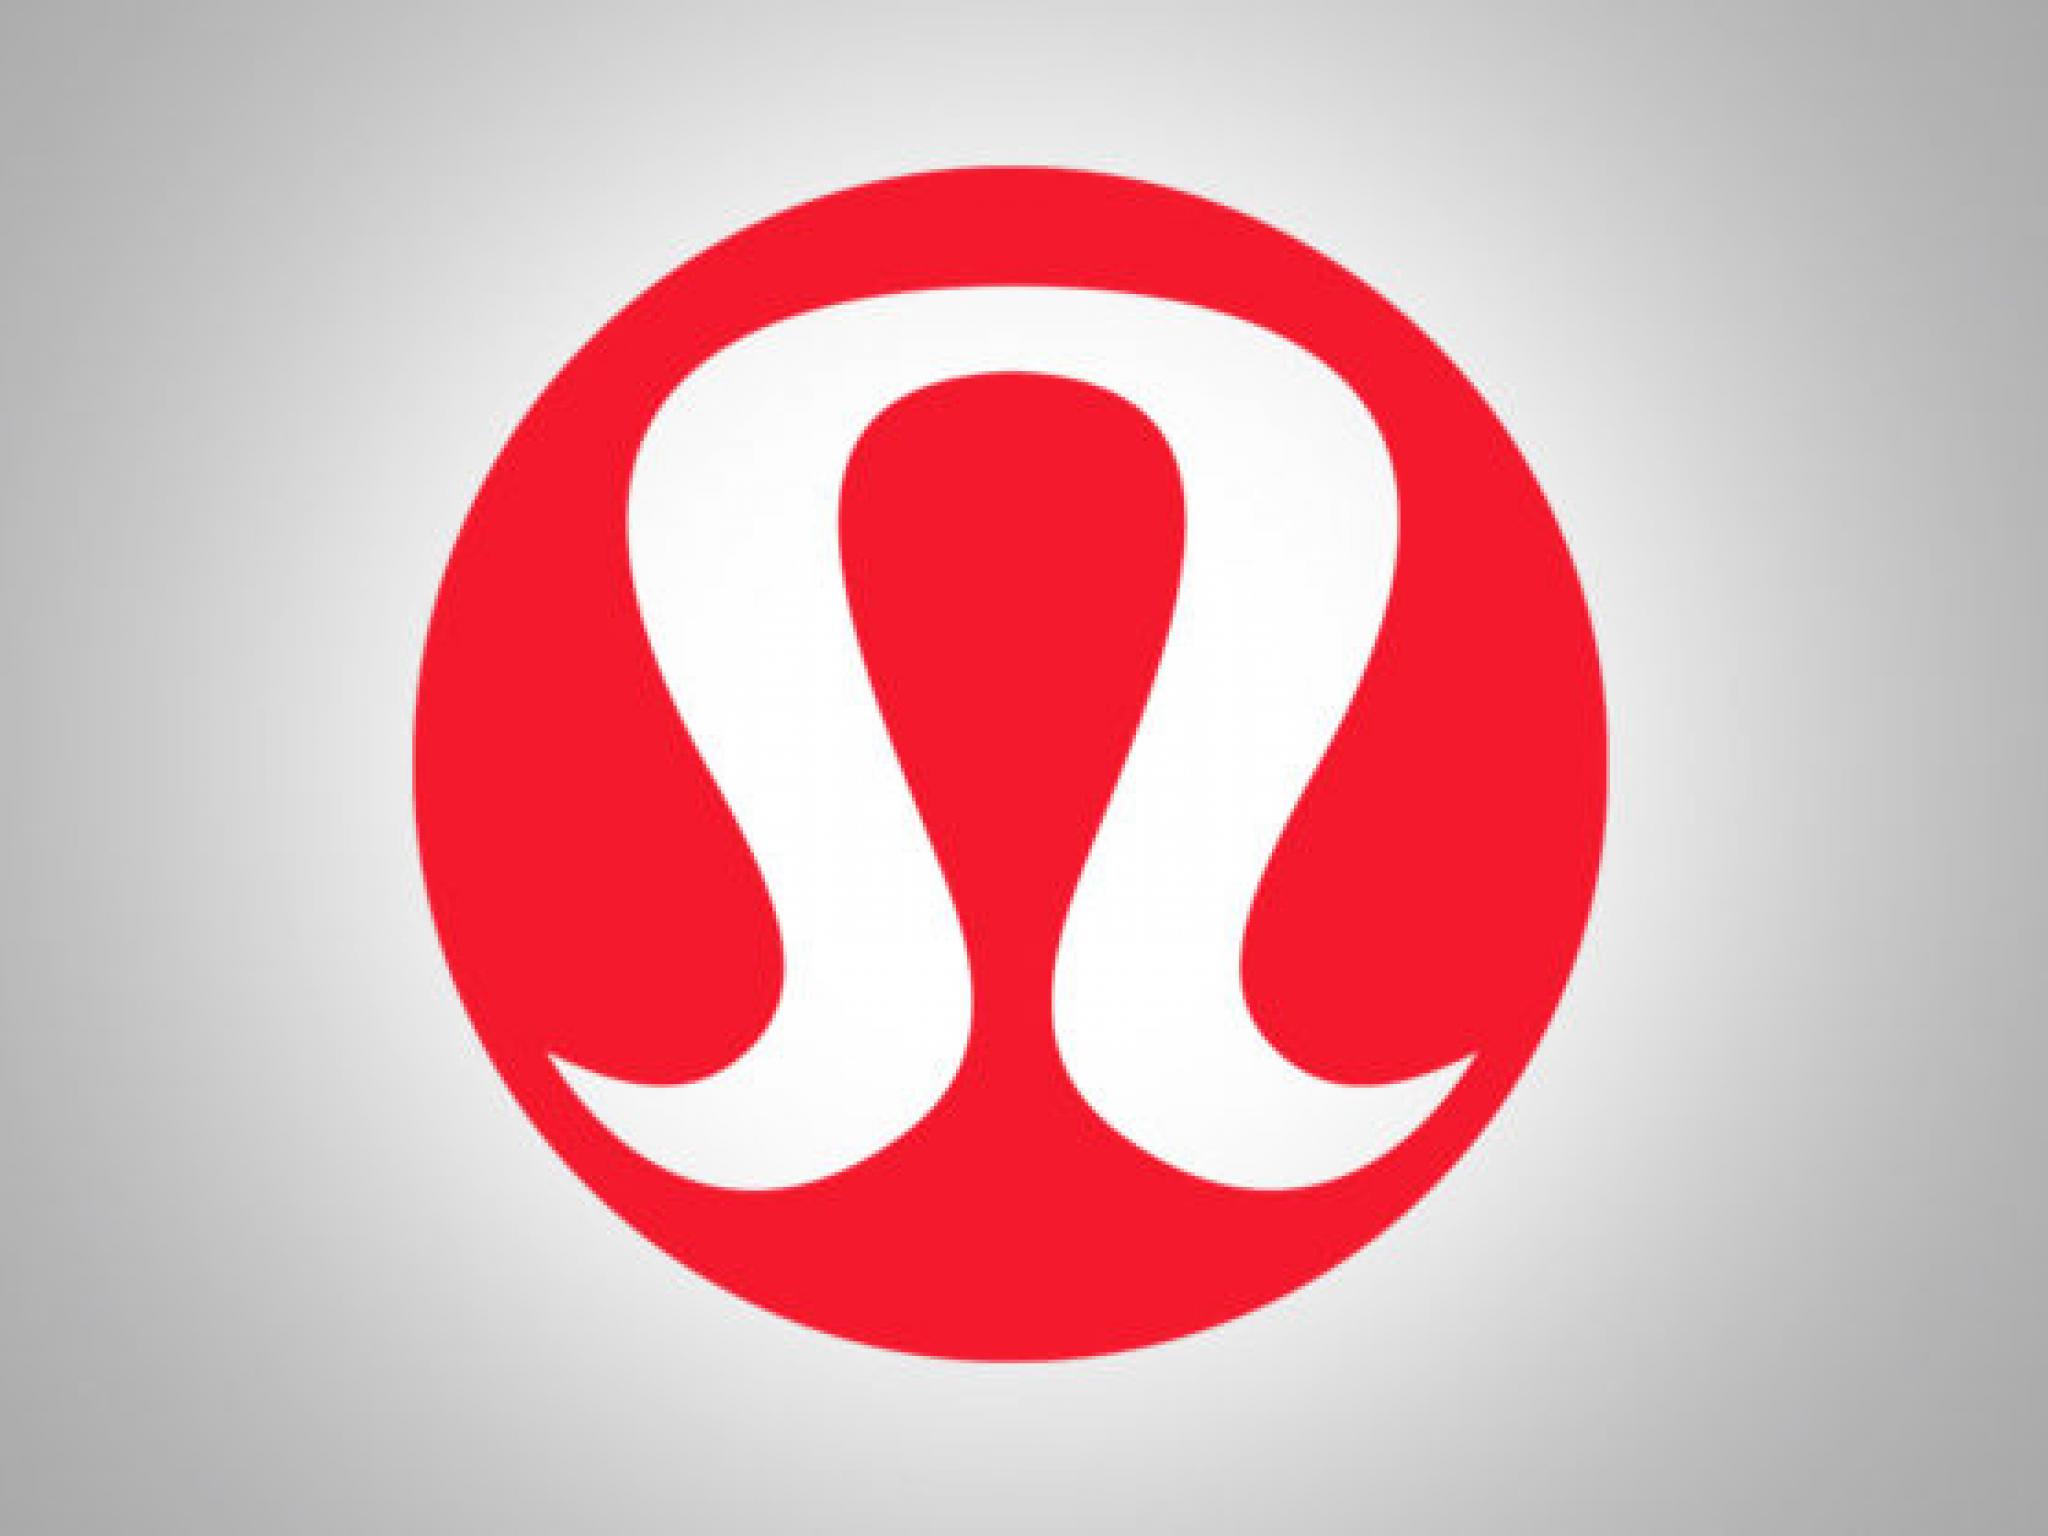  lululemon-to-surge-over-20-plus-wedbush-predicts-370-for-dominos 